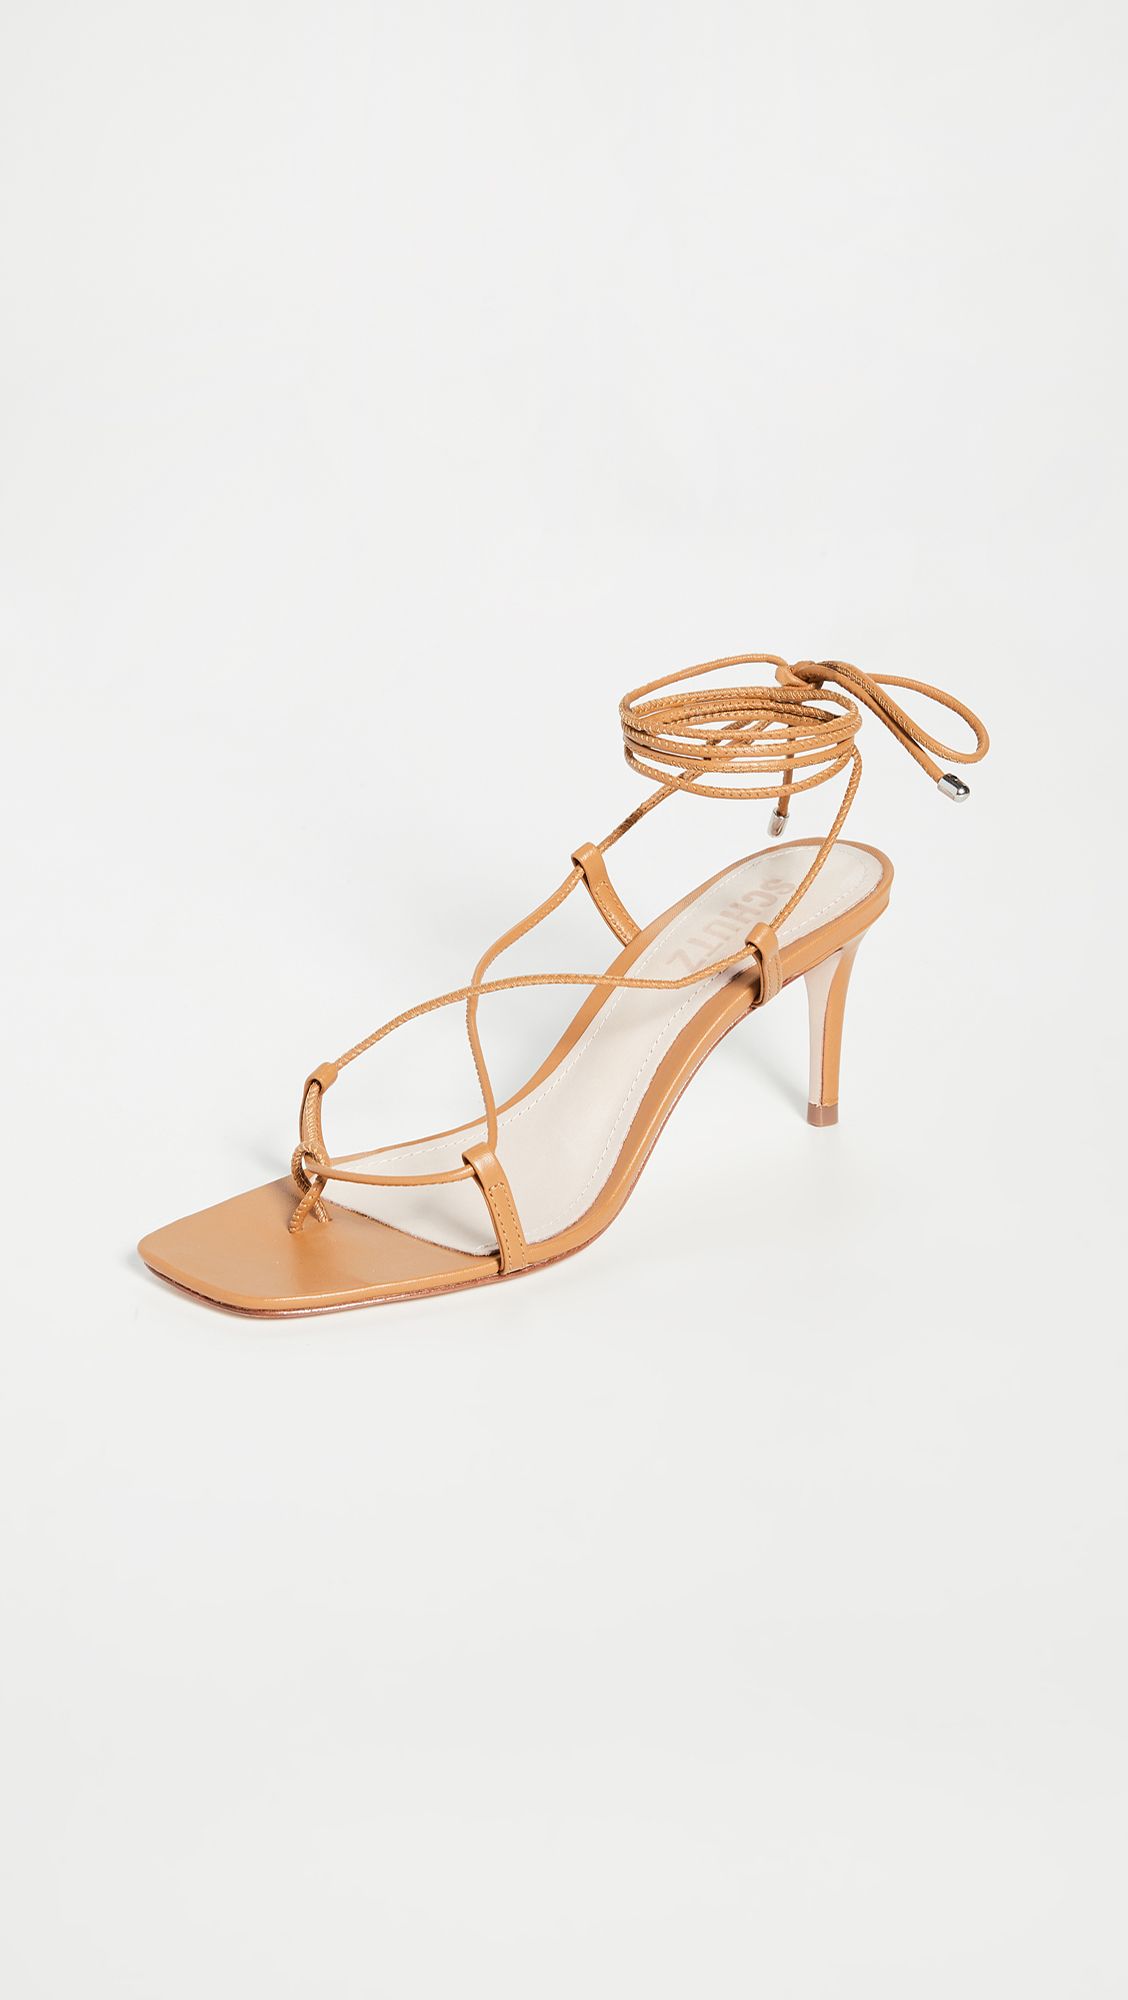 24 Spring Sandals That Are Trendy and Wearable | Who What Wear